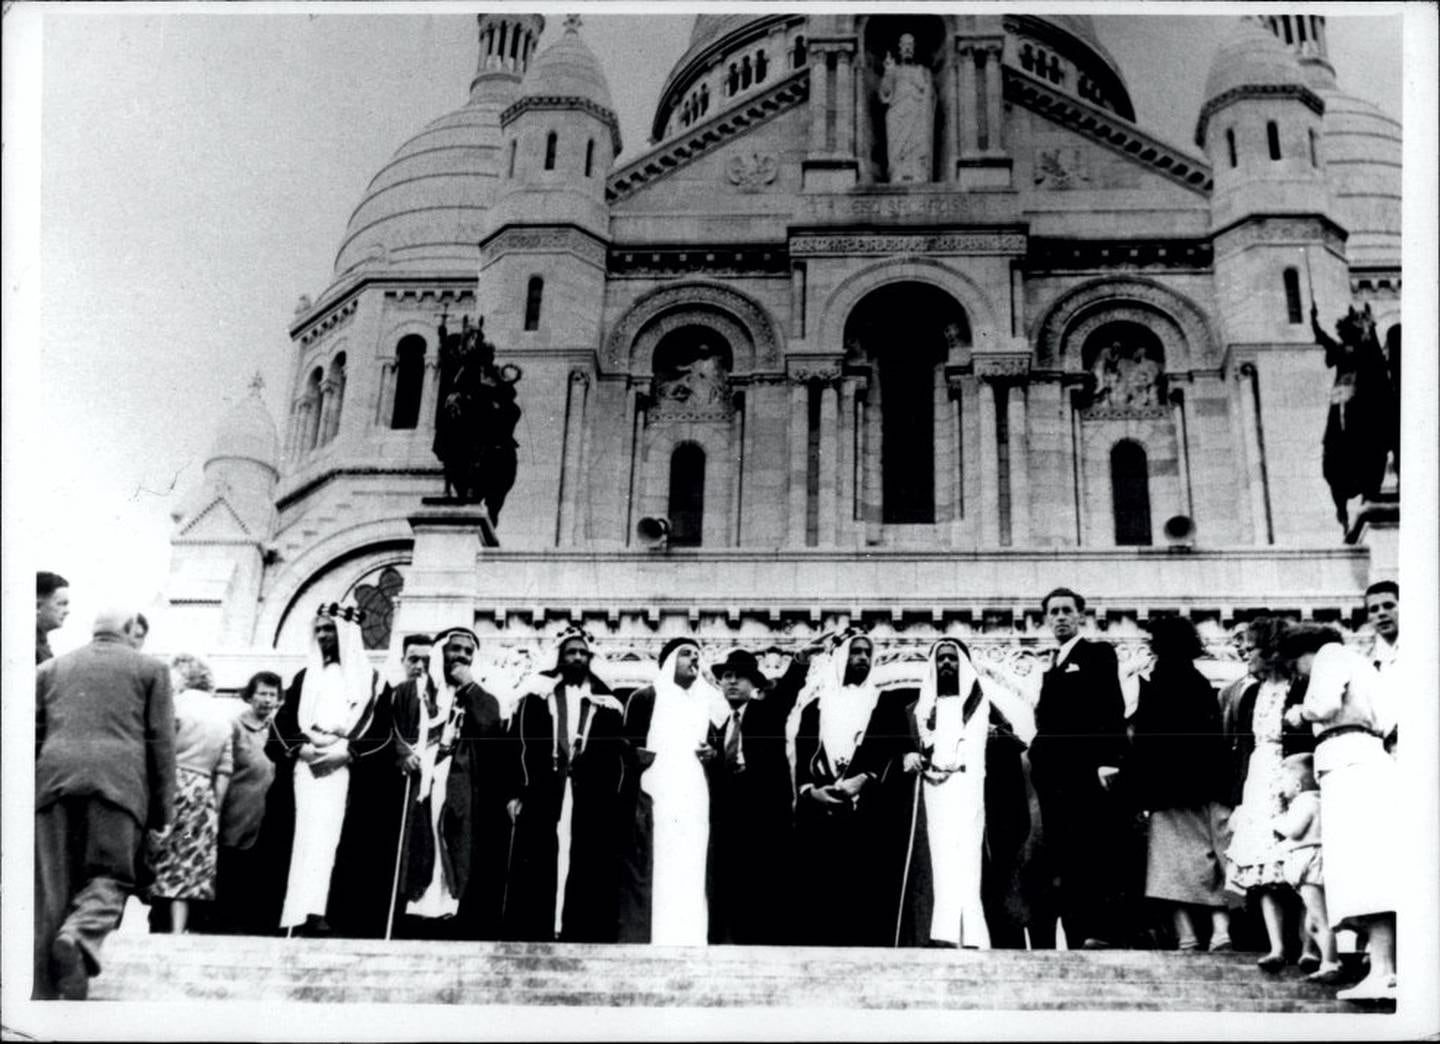  At the Basilica of the Sacred Heart of Paris. Courtesy The Victor Hashem Family Collection 